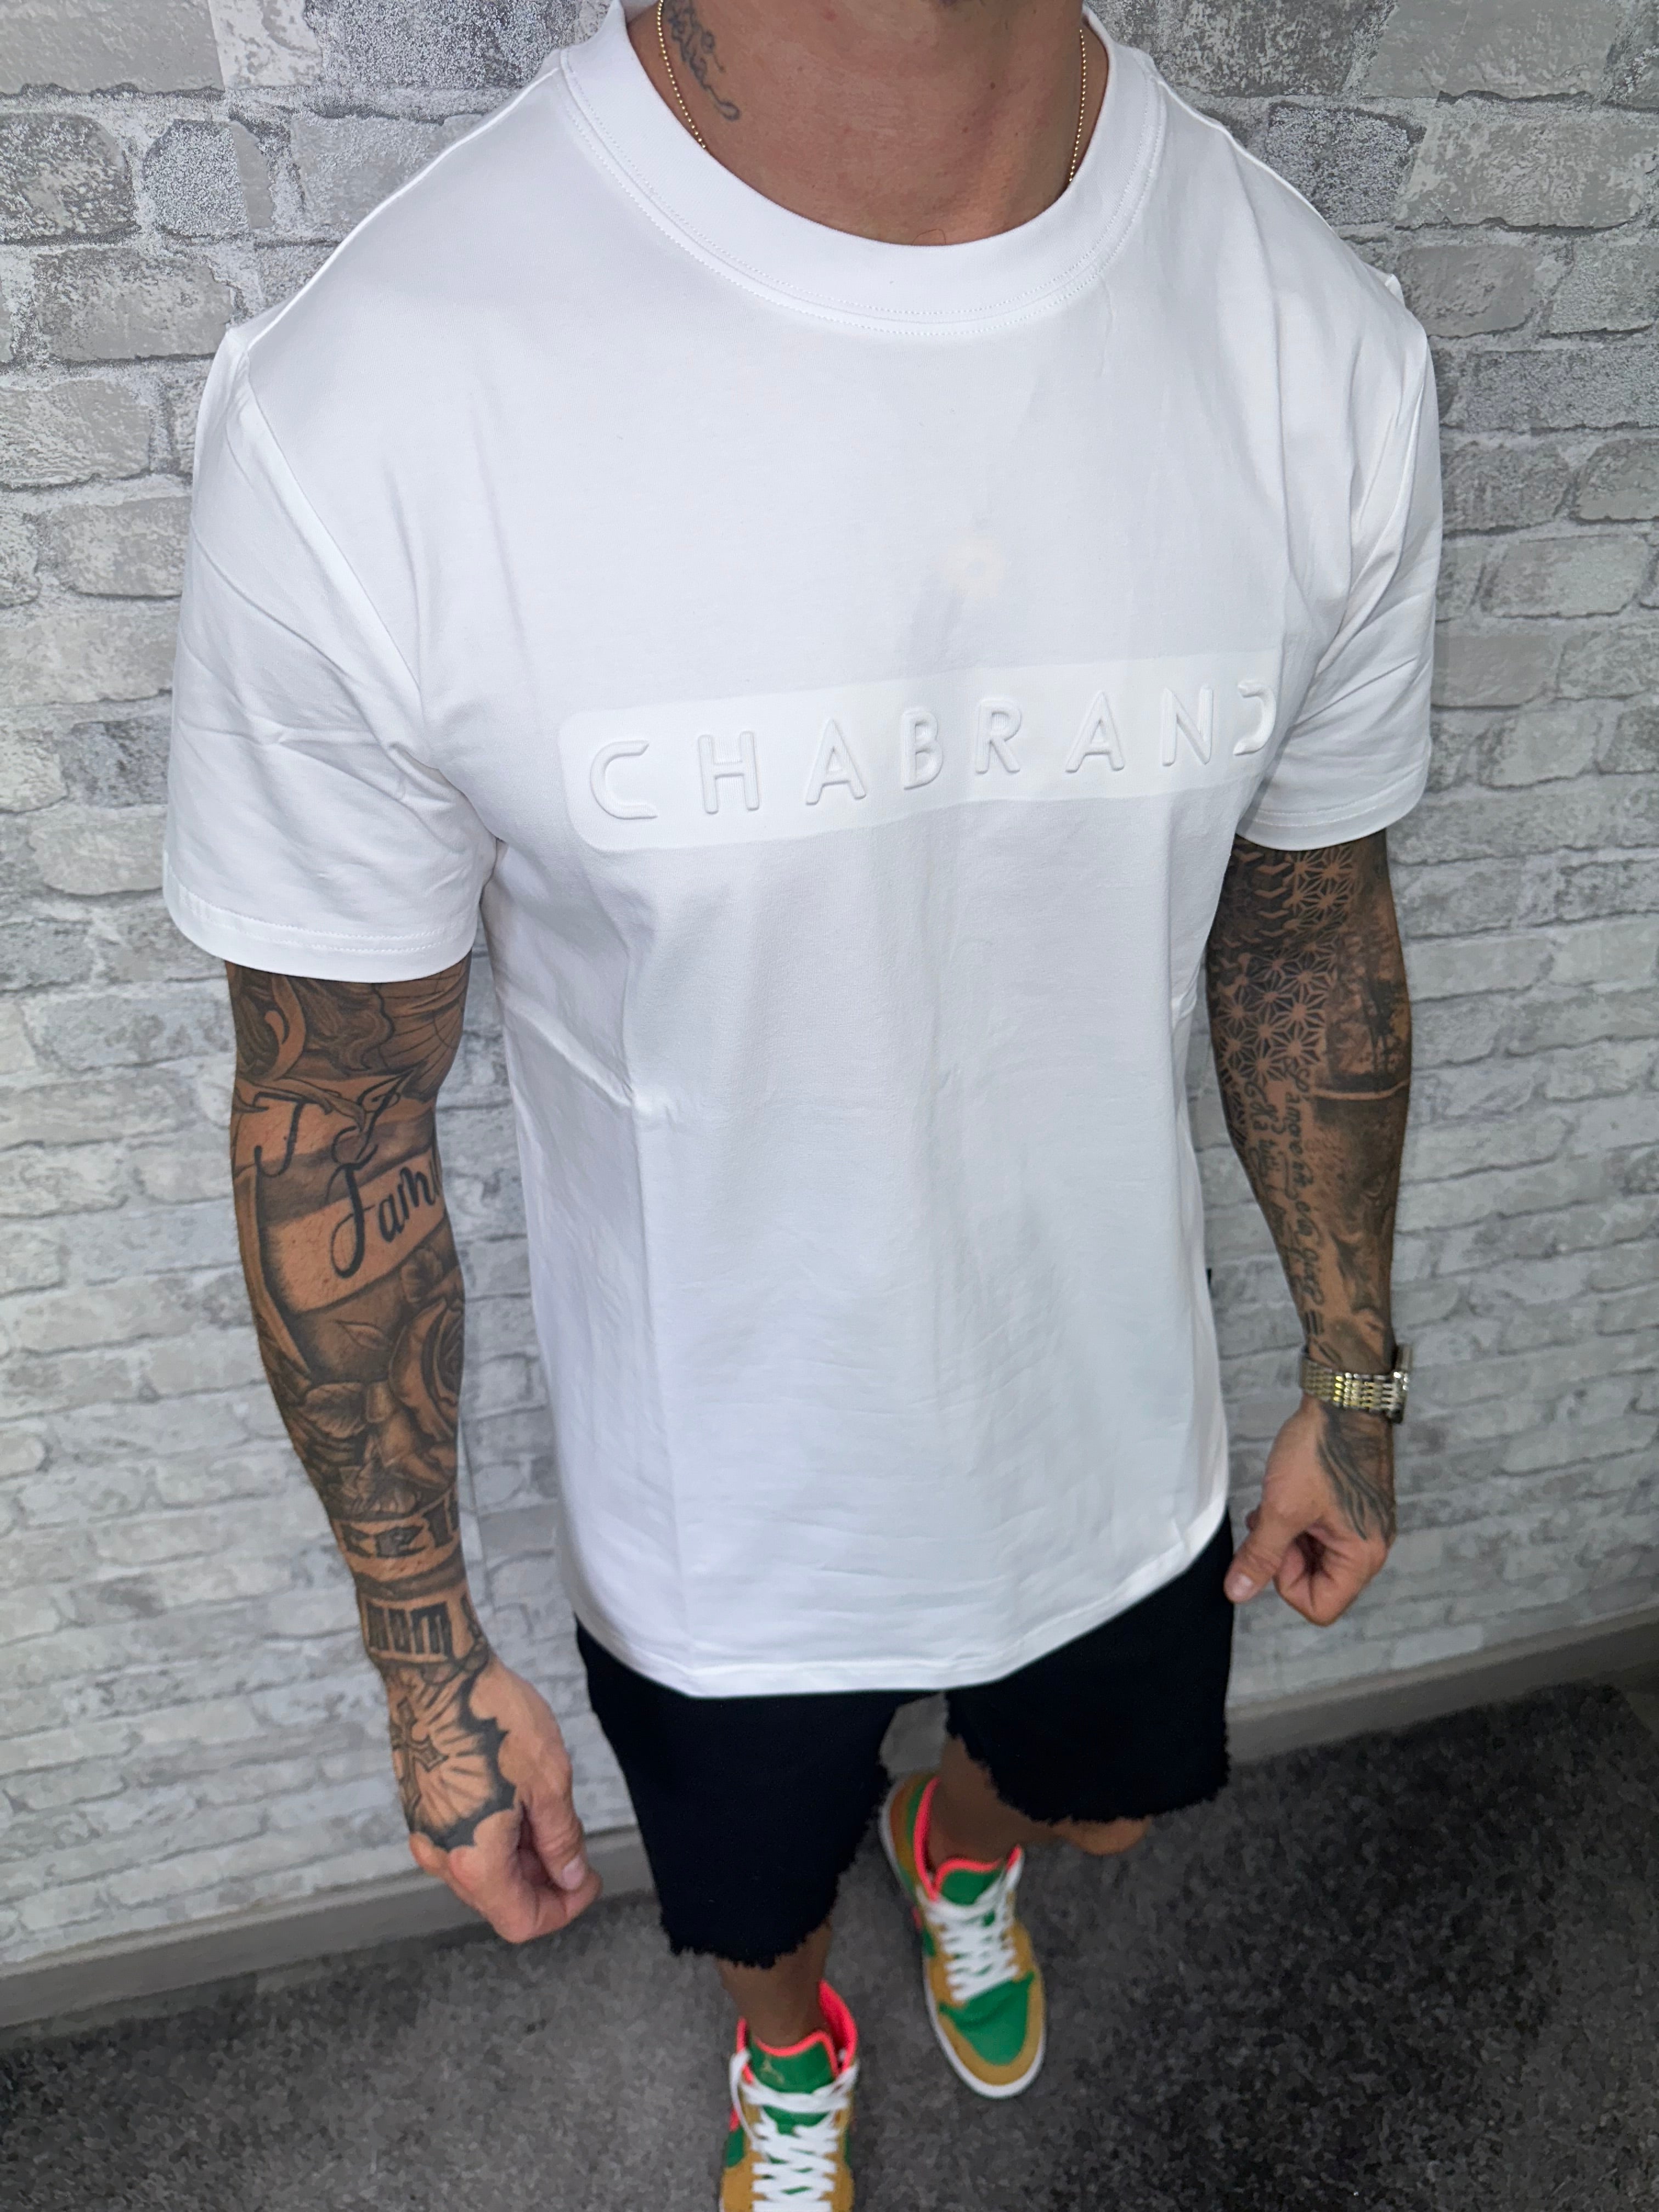 CHABRAND - White relief T-shirt